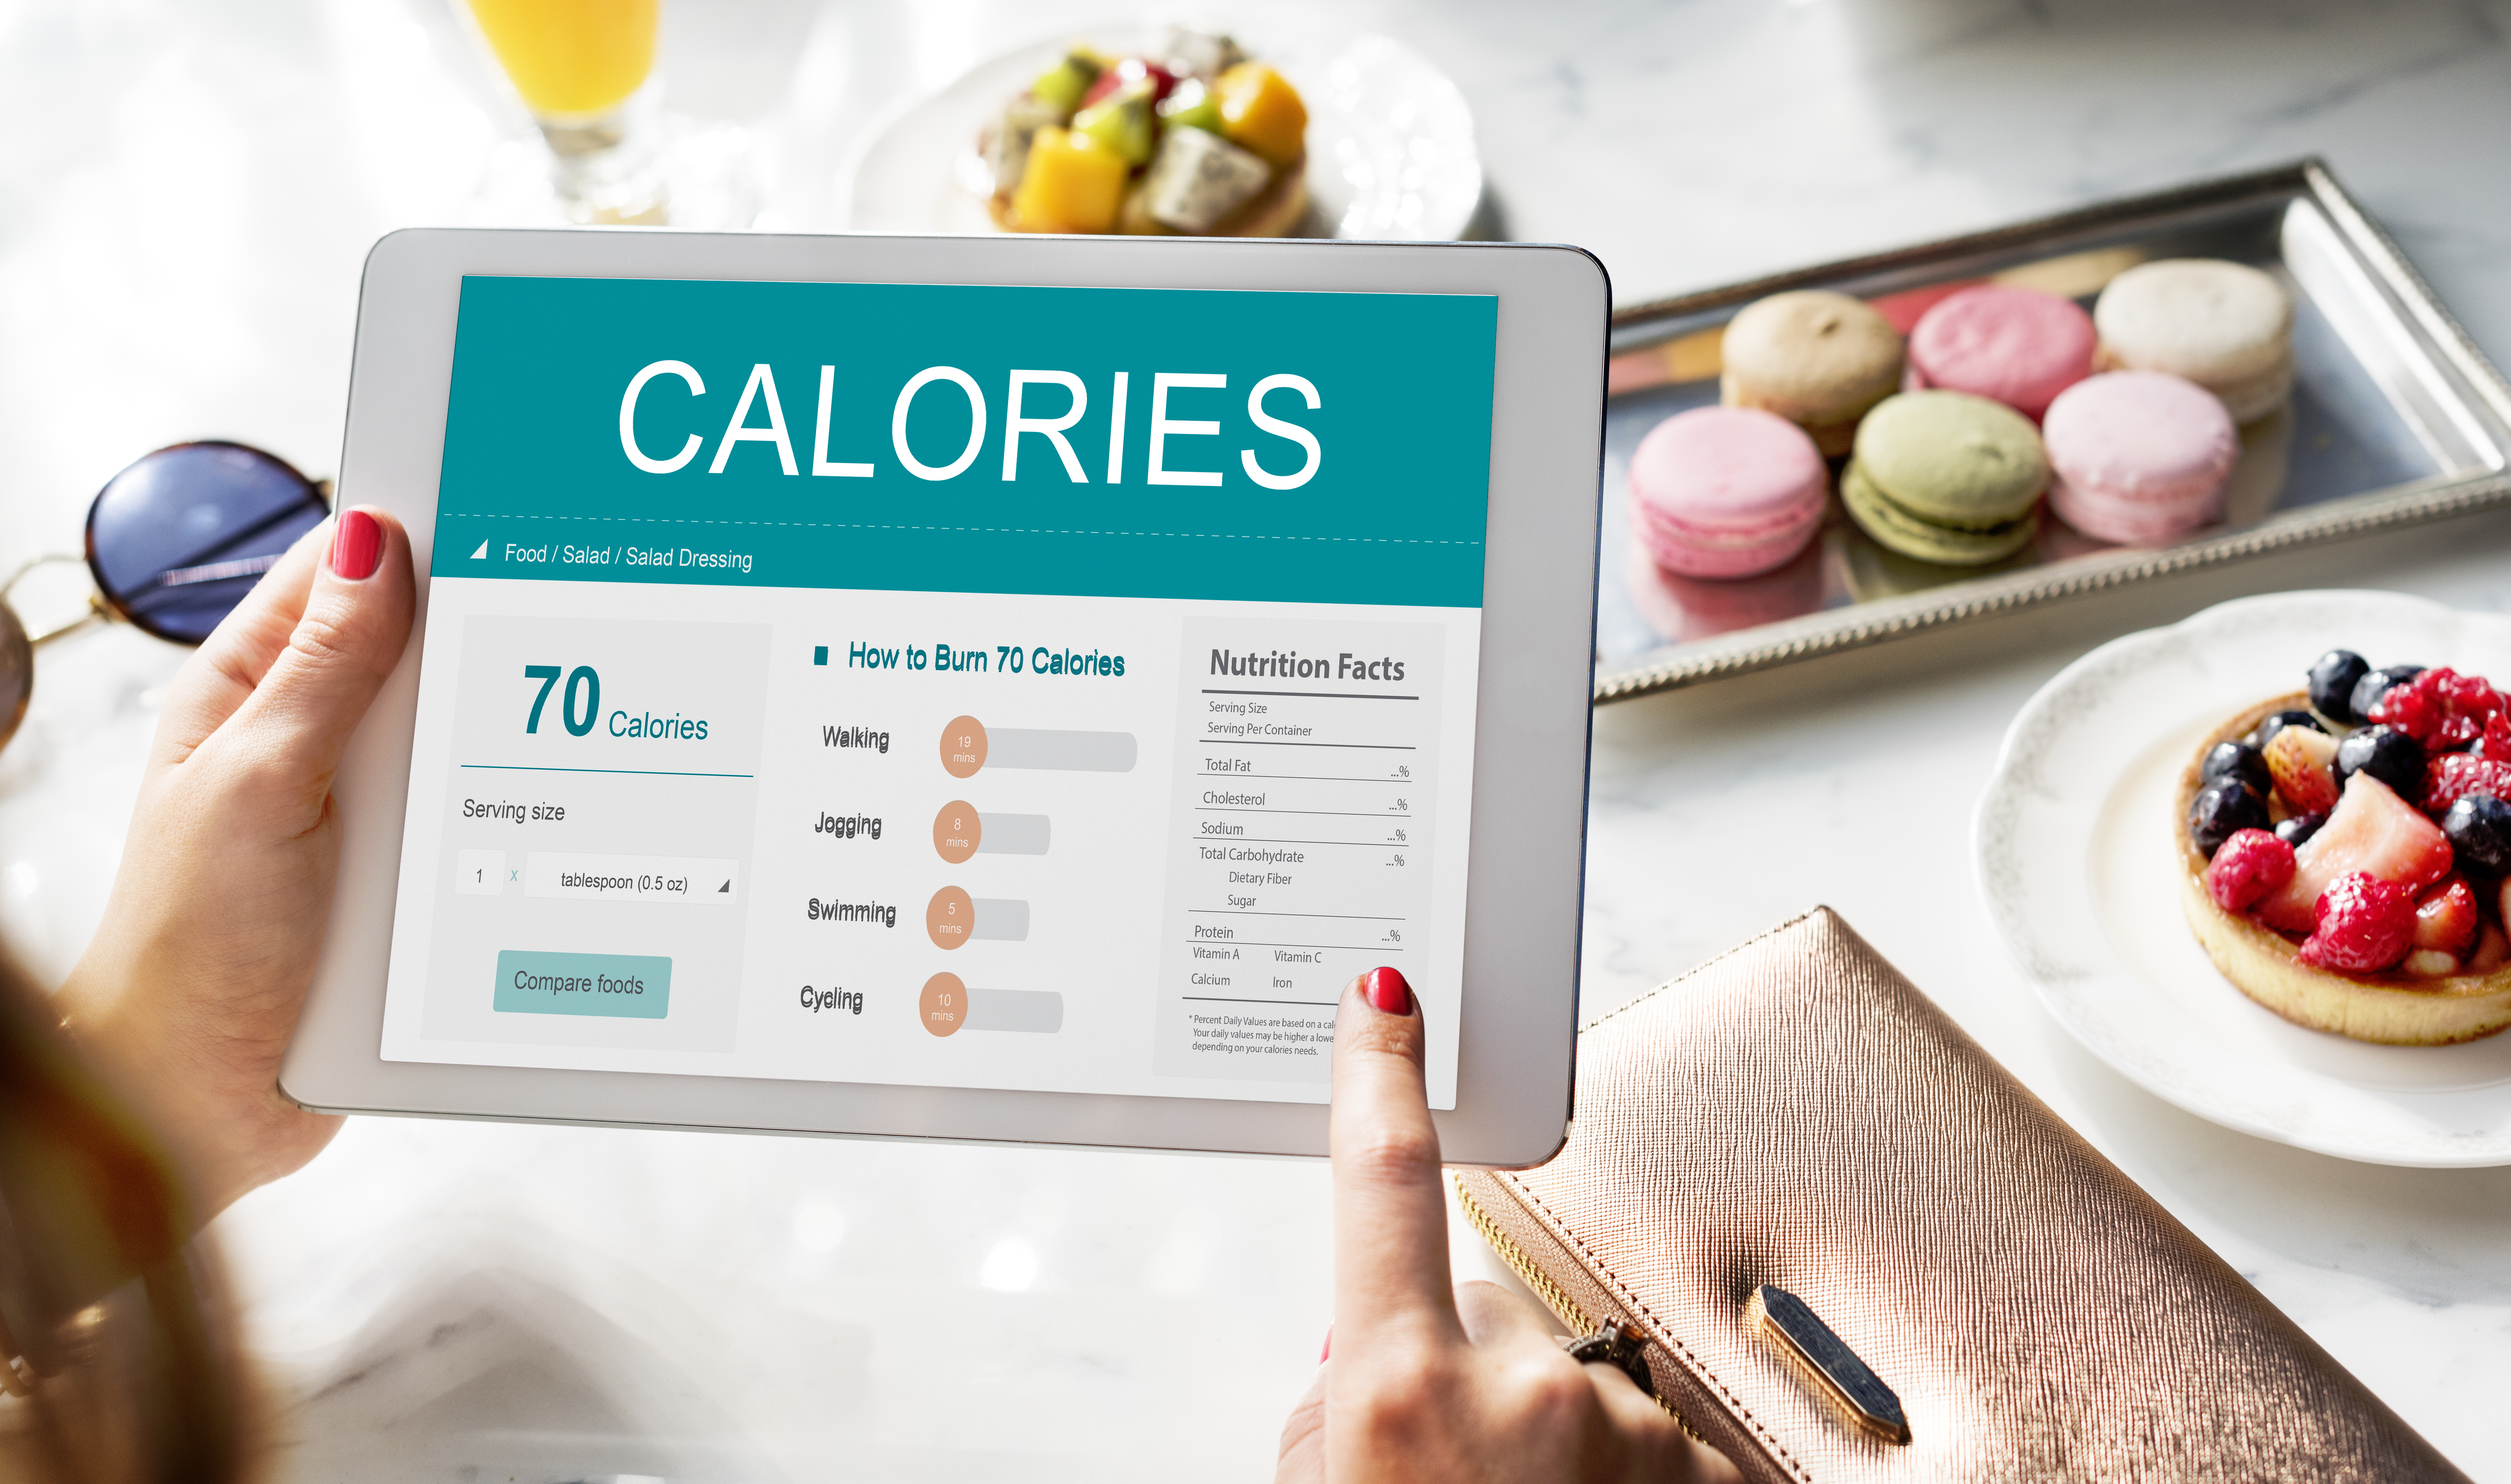 Choose Your Calories by the Company They Keep